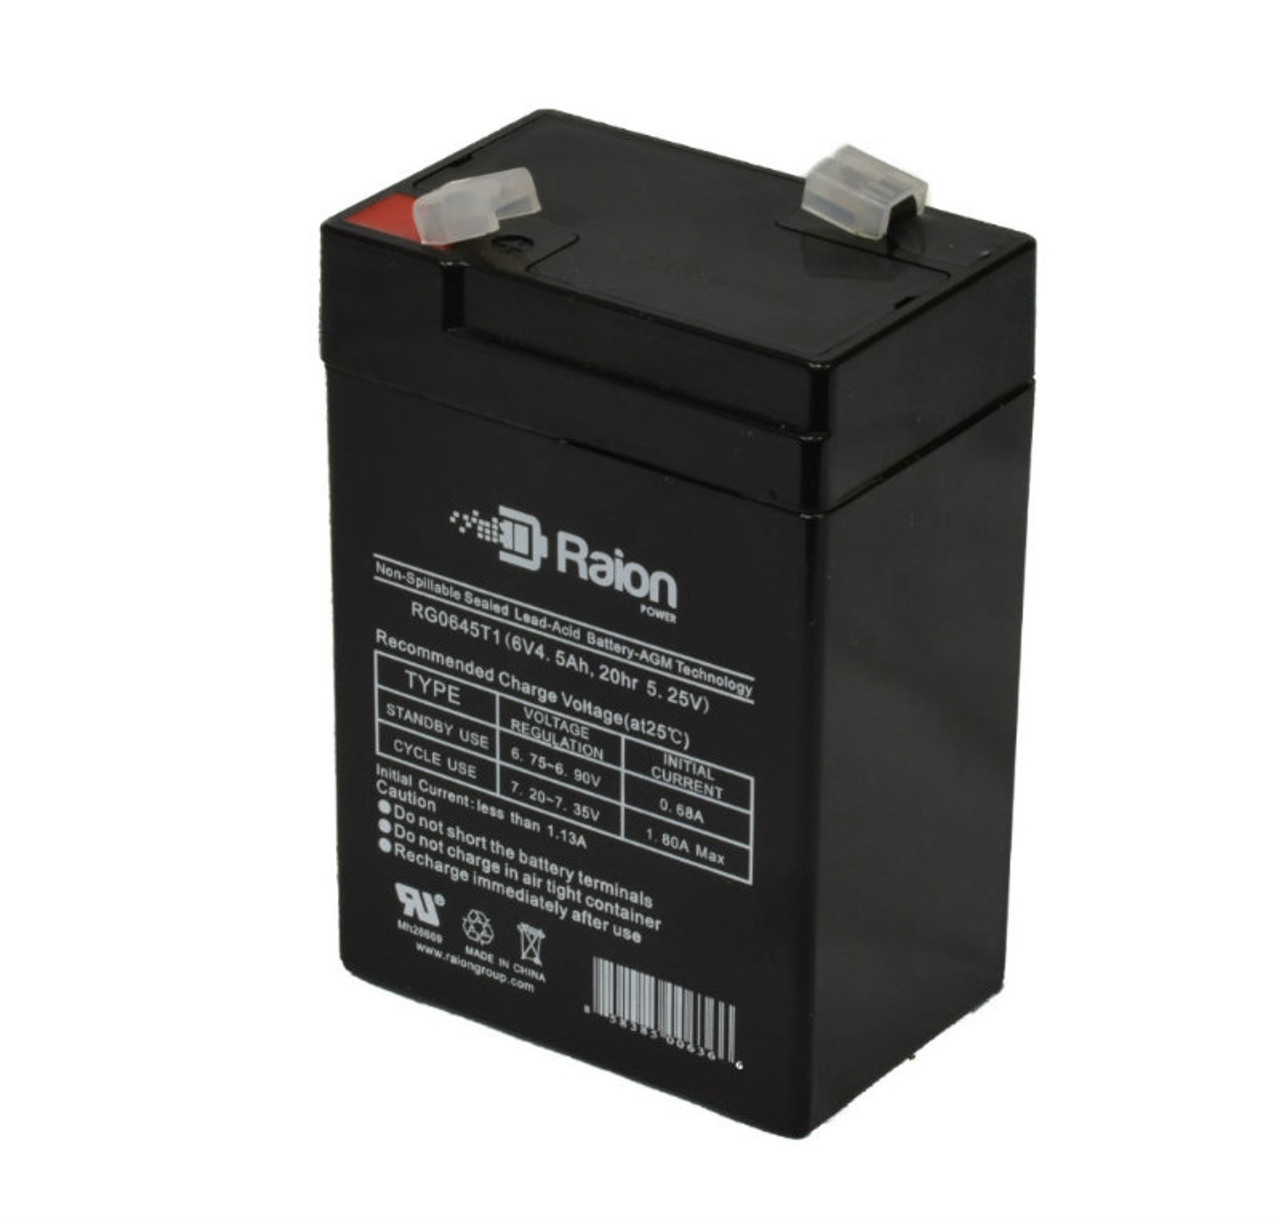 Raion Power RG0645T1 6V 4.5Ah Replacement Battery Cartridge for Alaris Medical Intell Pump 2001